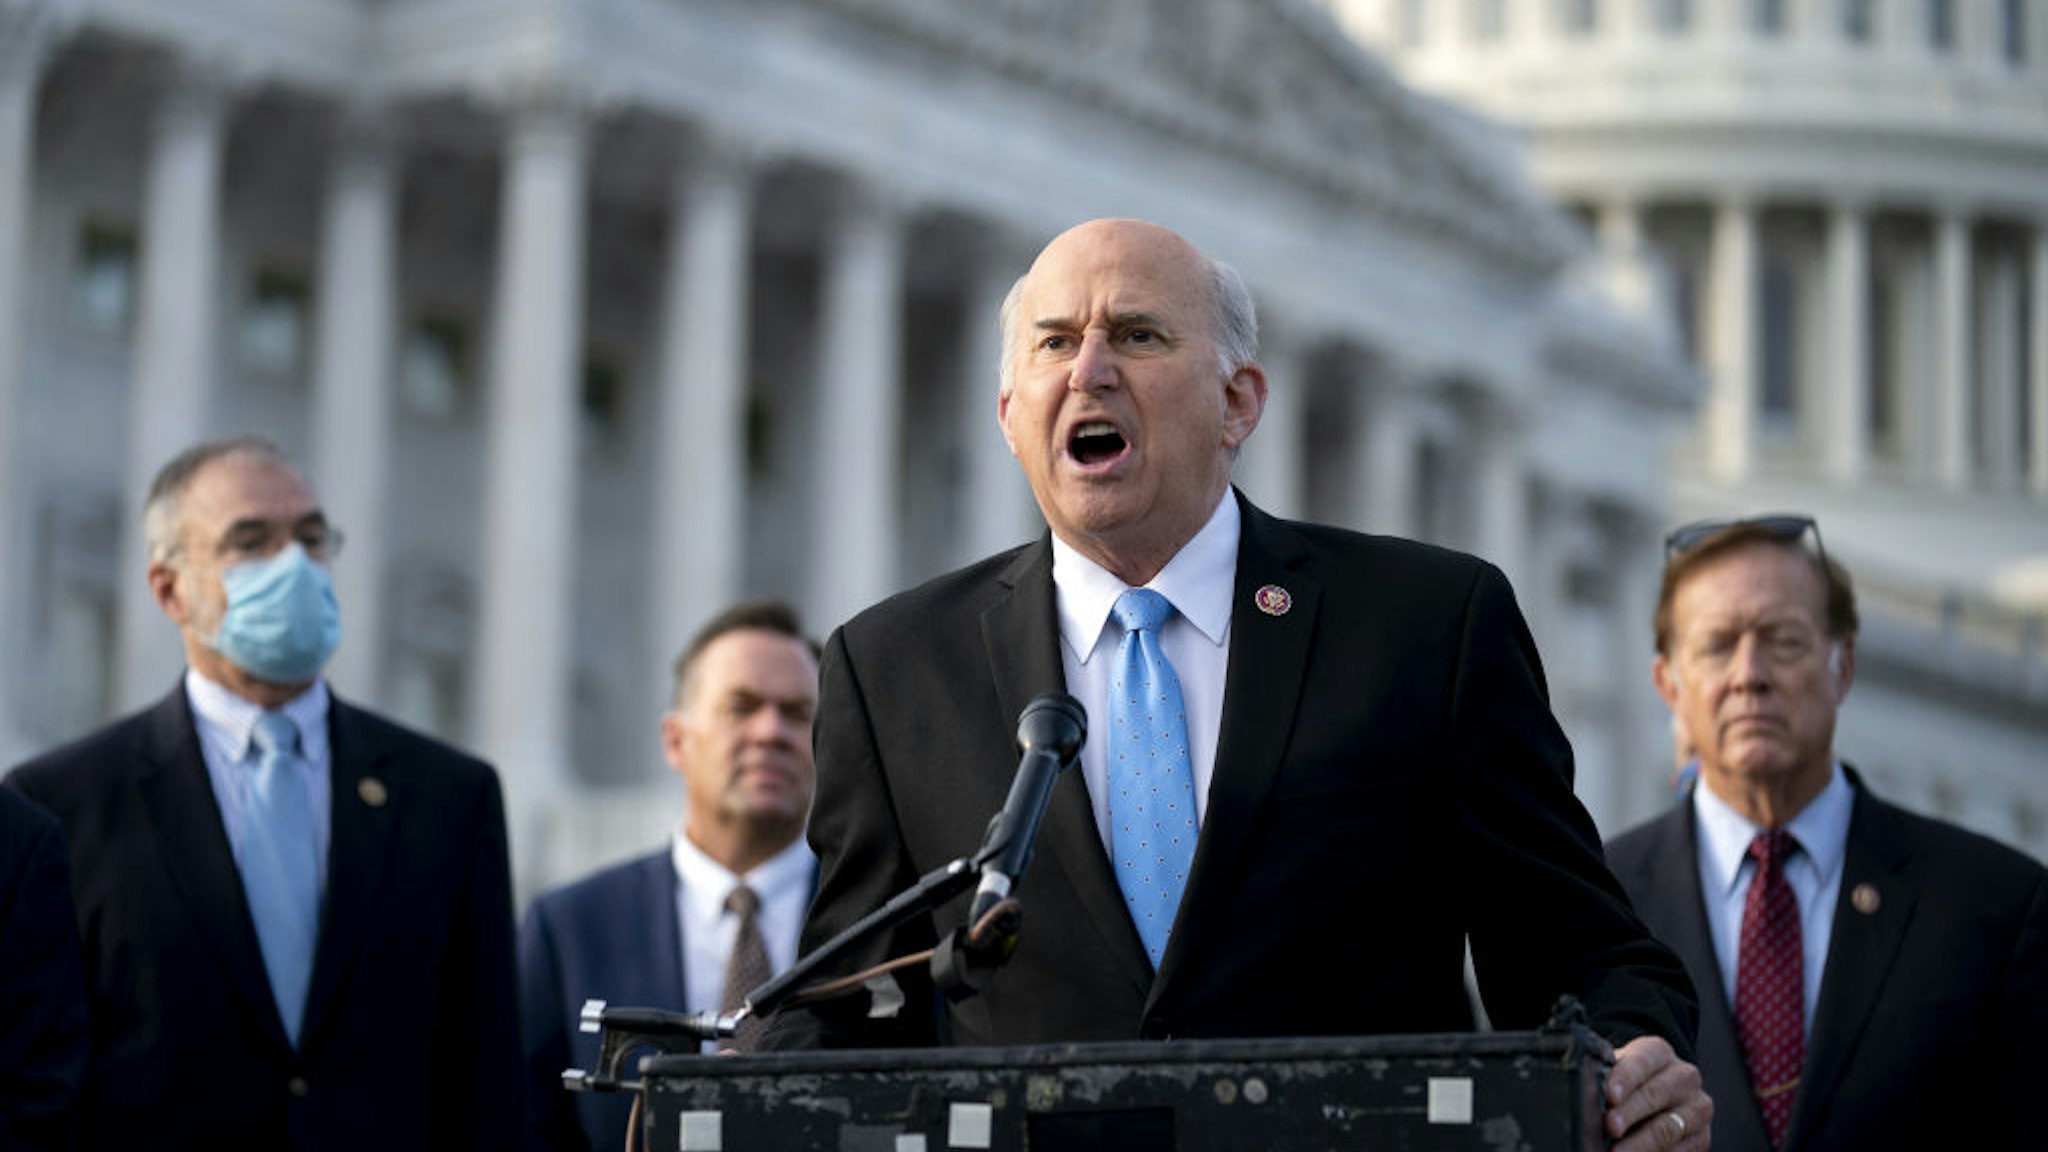 Representative Louie Gohmert, a Republican from Texas, speaks during a news conference with members of the Freedom Caucus outside the U.S. Capitol in Washington, D.C., U.S., on Thursday, Dec. 3, 2020.